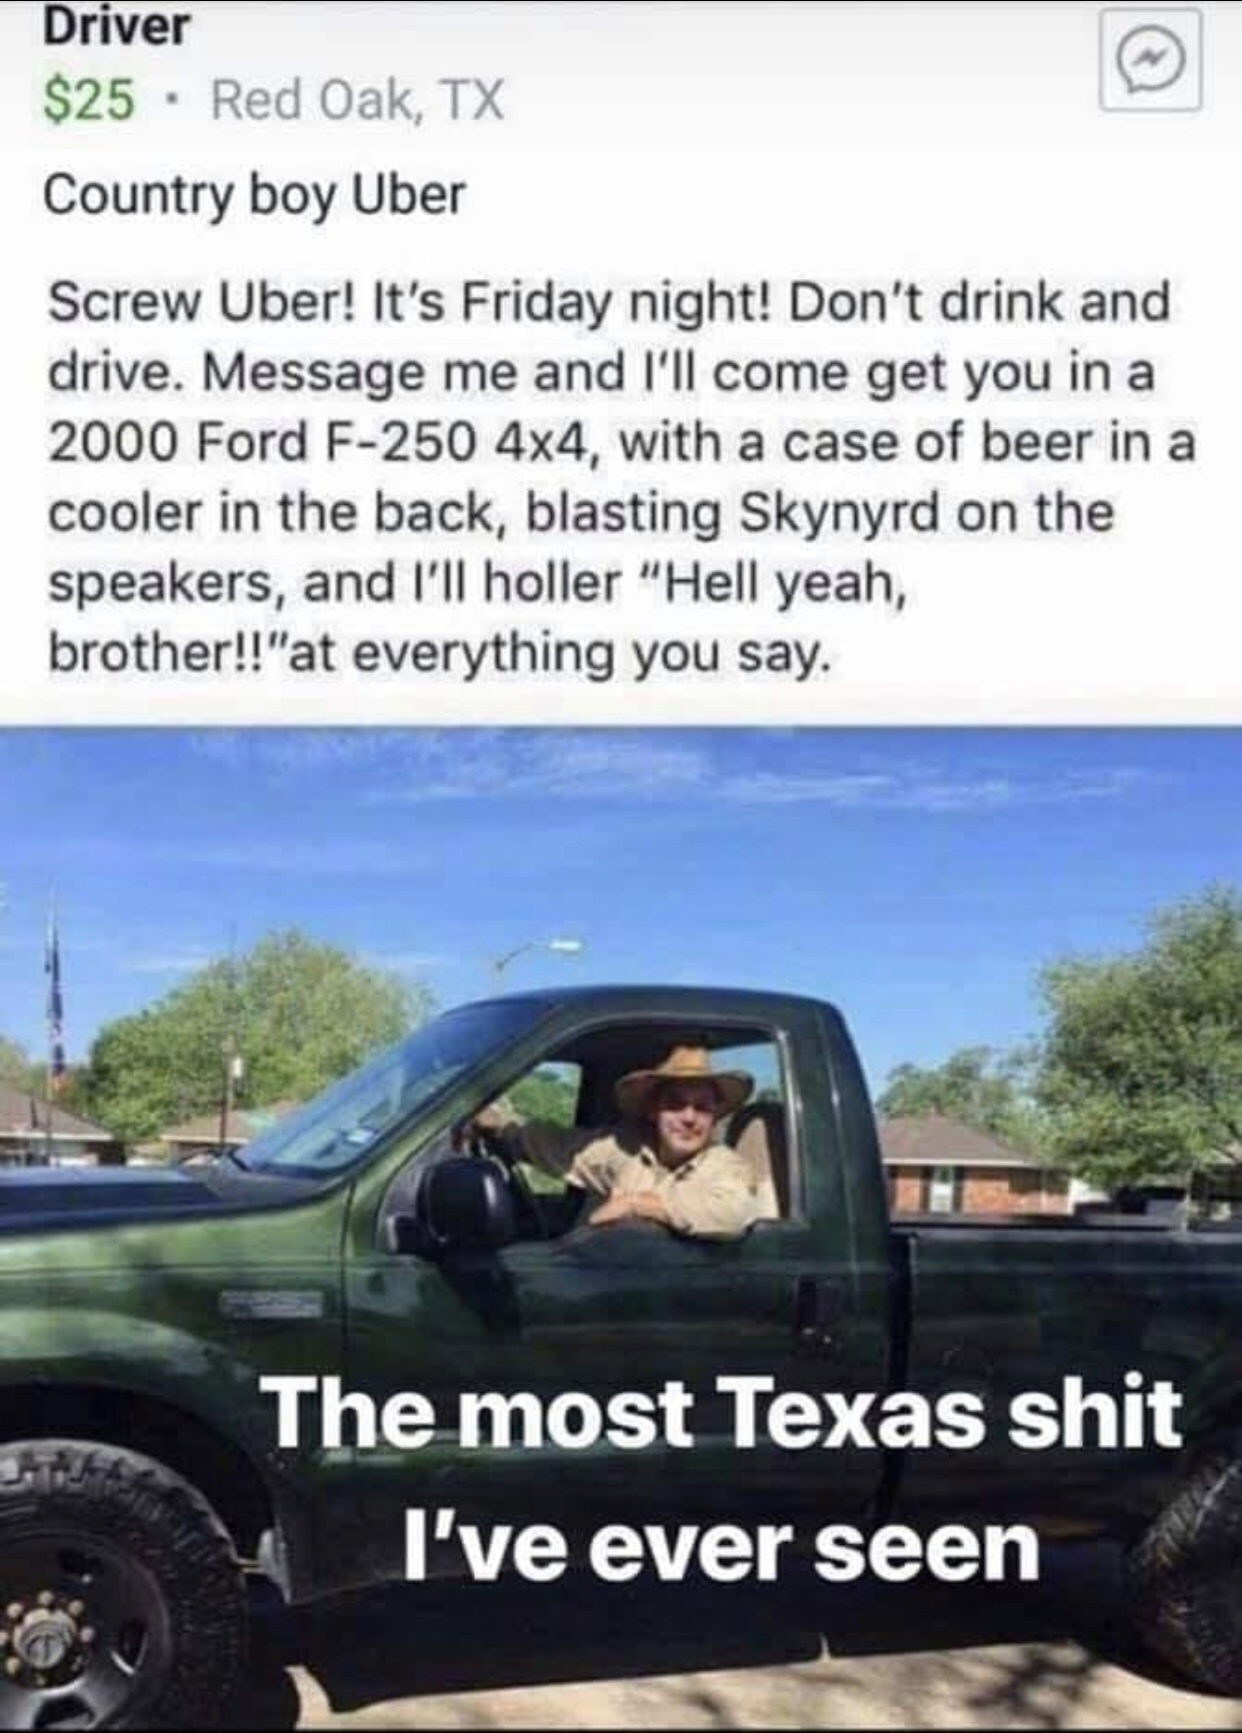 hell yeah brother meme - Driver $25 Red Oak, Tx Country boy Uber Screw Uber! It's Friday night! Don't drink and drive. Message me and I'll come get you in a 2000 Ford F250 4x4, with a case of beer in a cooler in the back, blasting Skynyrd on the speakers,